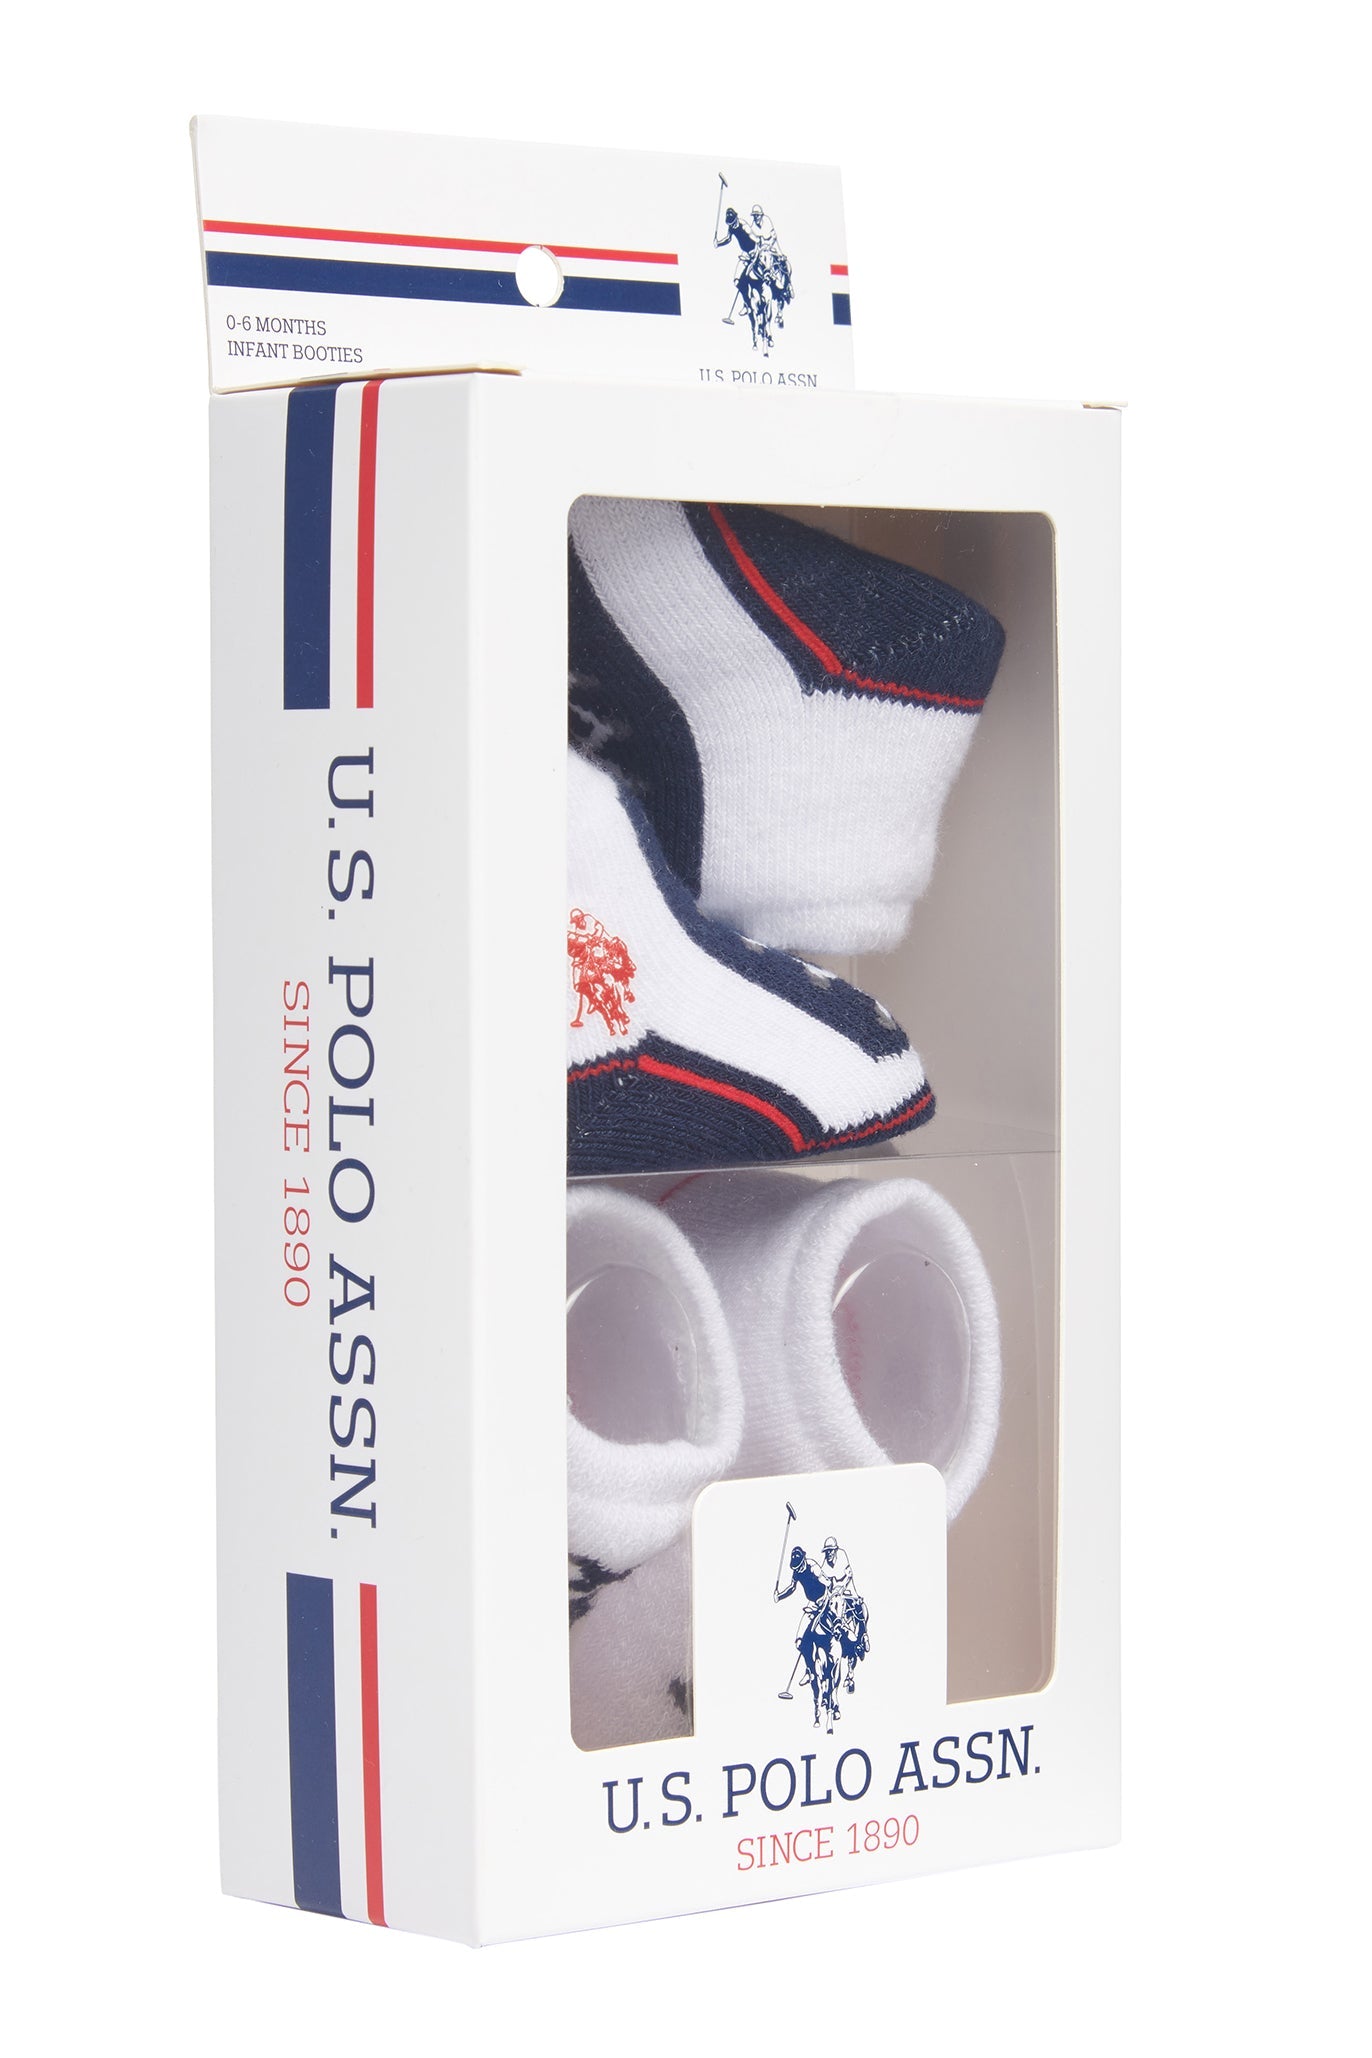 U.S. Polo Assn. Baby 2 Piece Boxed Gifting Set in Navy